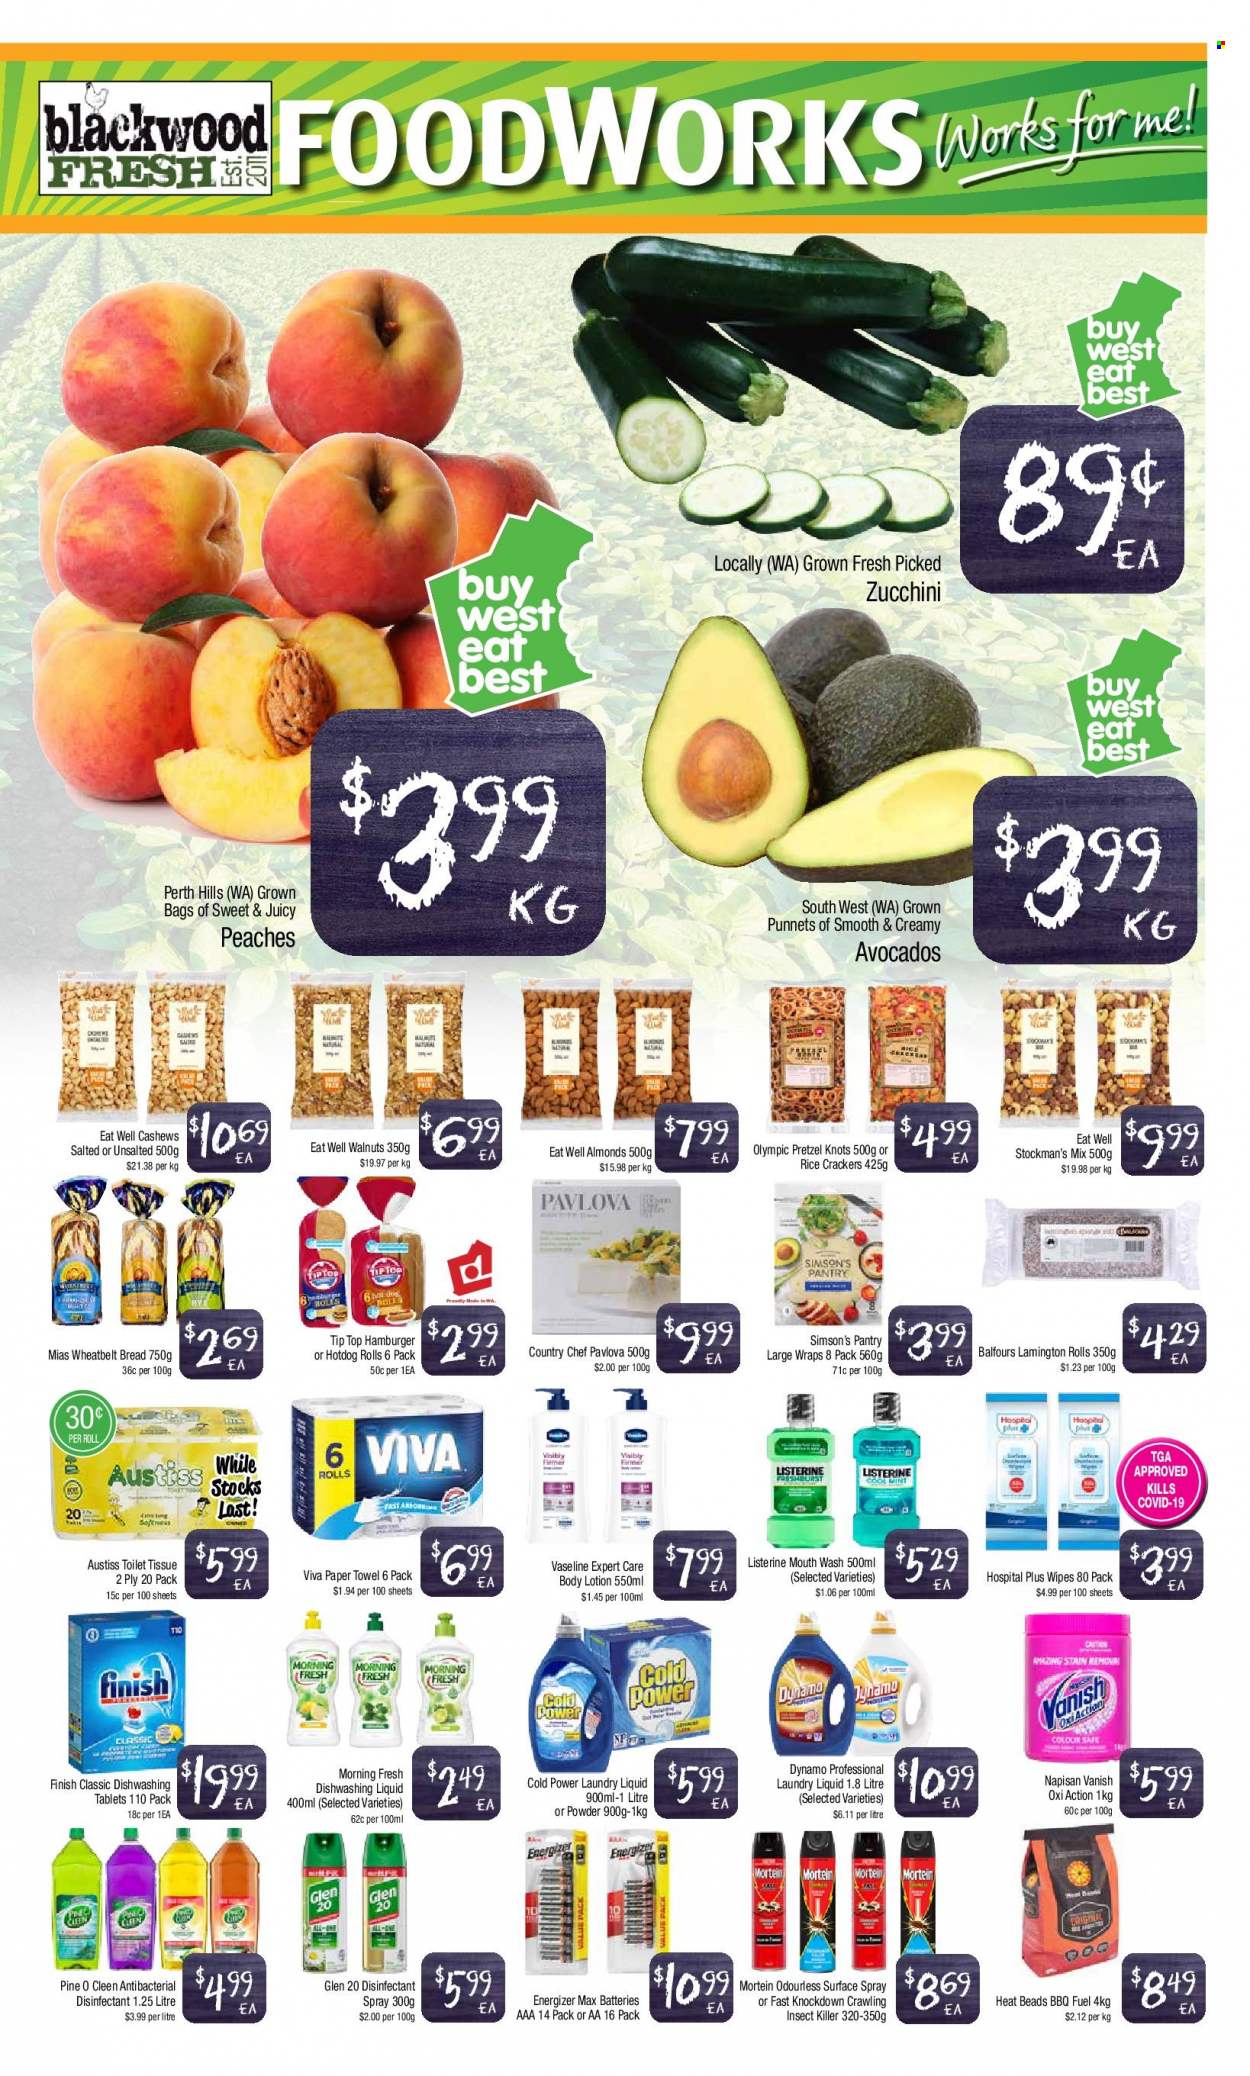 thumbnail - Foodworks Catalogue - 19 Jan 2022 - 25 Jan 2022 - Sales products - bread, tortillas, hot dog rolls, pretzels, Tip Top, wraps, zucchini, avocado, hamburger, crackers, rice crackers, almonds, cashews, walnuts, wipes, toilet paper, paper towels, desinfection, antibacterial spray, Mortein, Vanish, laundry detergent, dishwashing liquid, dishwasher tablets, Vaseline, Listerine, mouthwash, body lotion, insect killer, battery, Energizer, aa batteries, Hill's. Page 3.